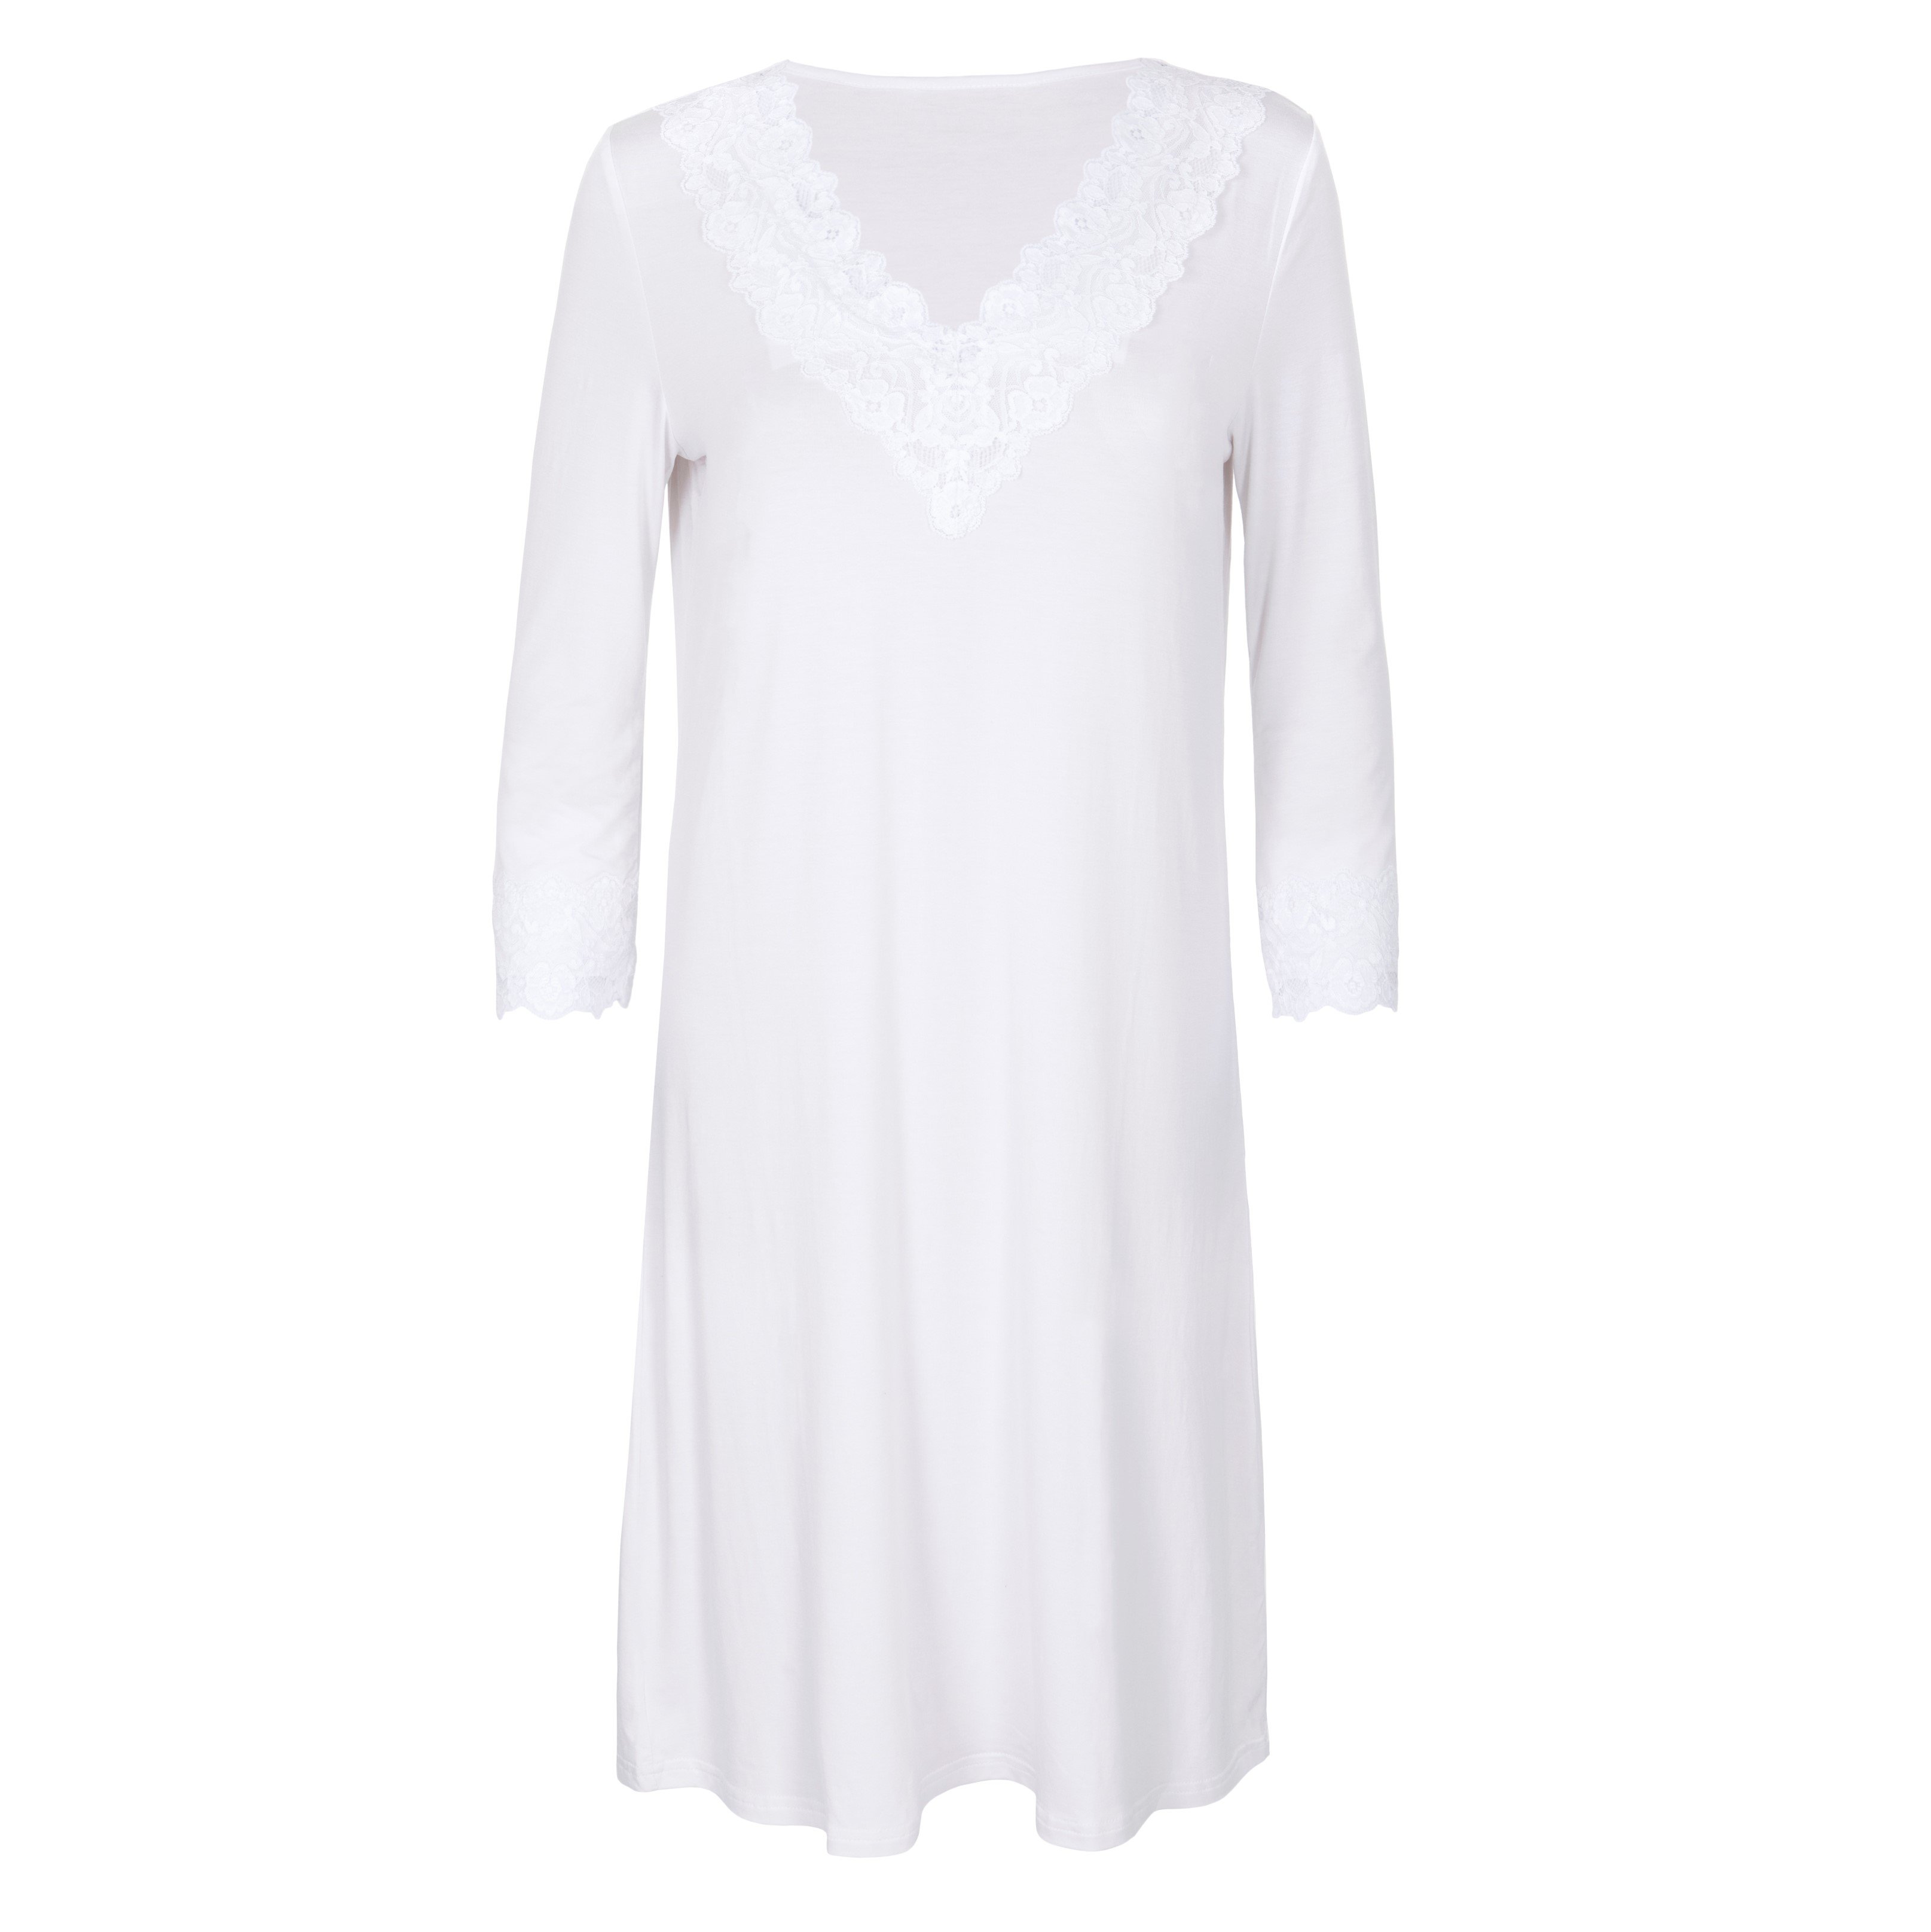 Ella Jersey White Nightie - available in all dress sizes. Viscose